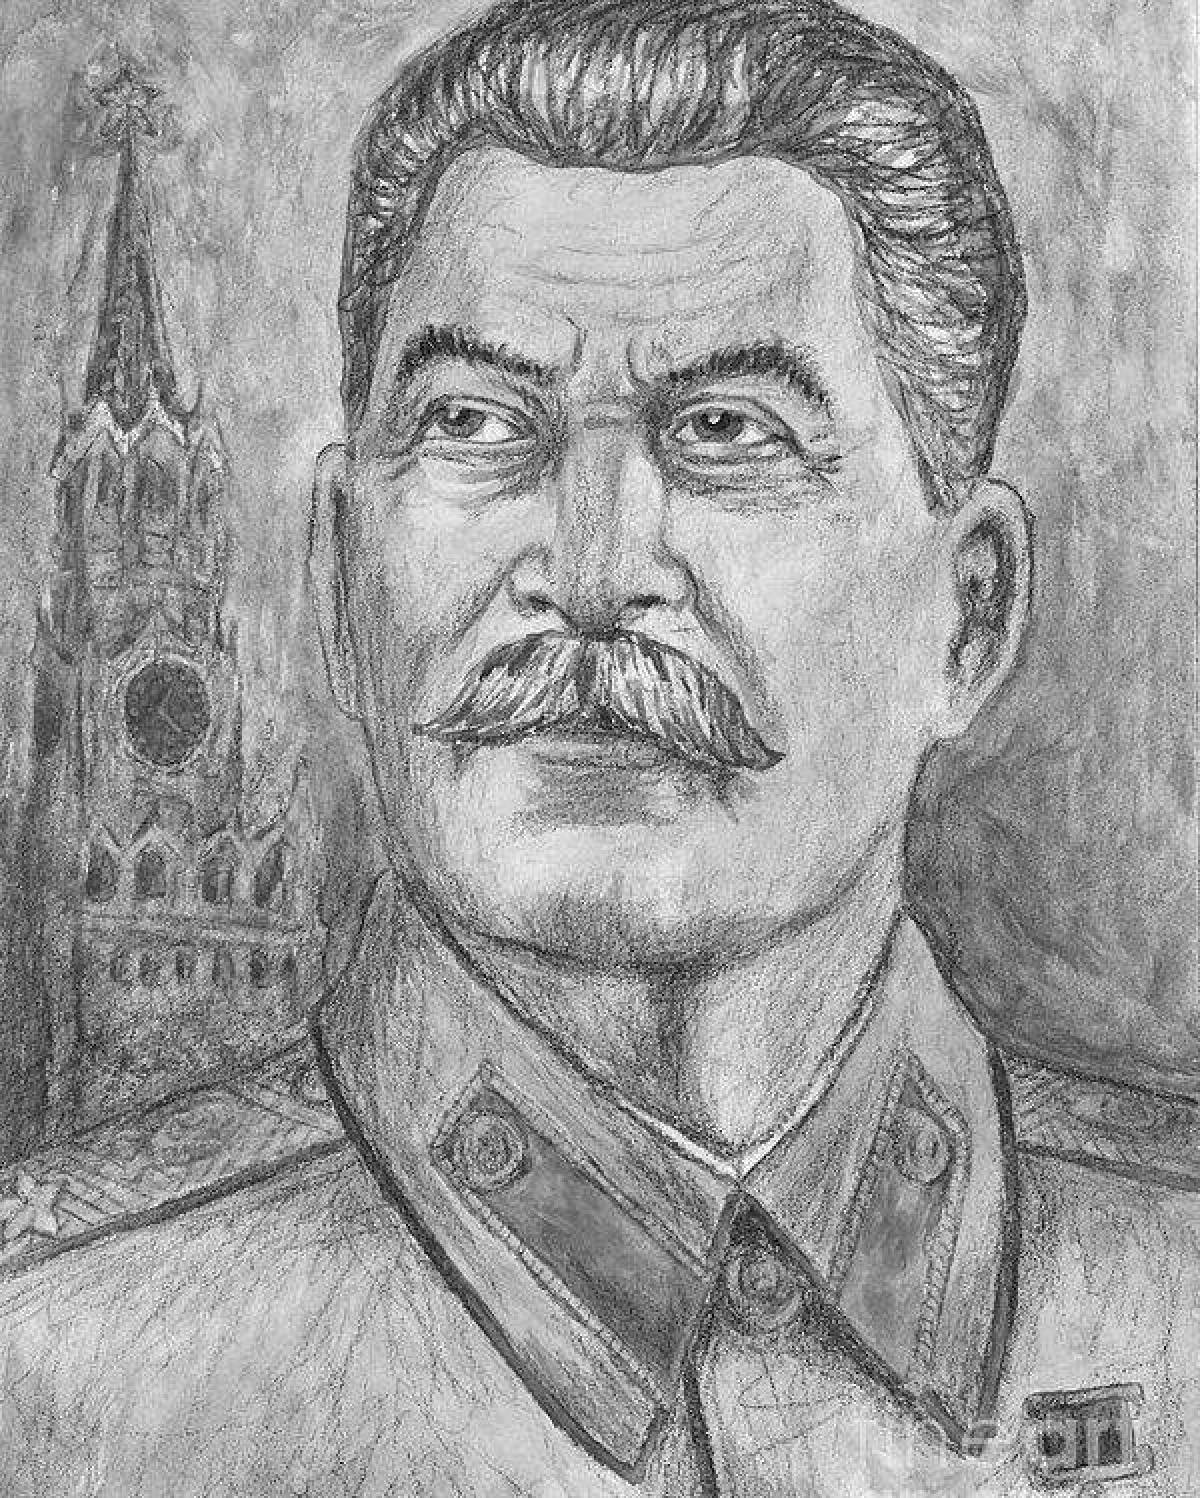 Stalin's intricate coloring